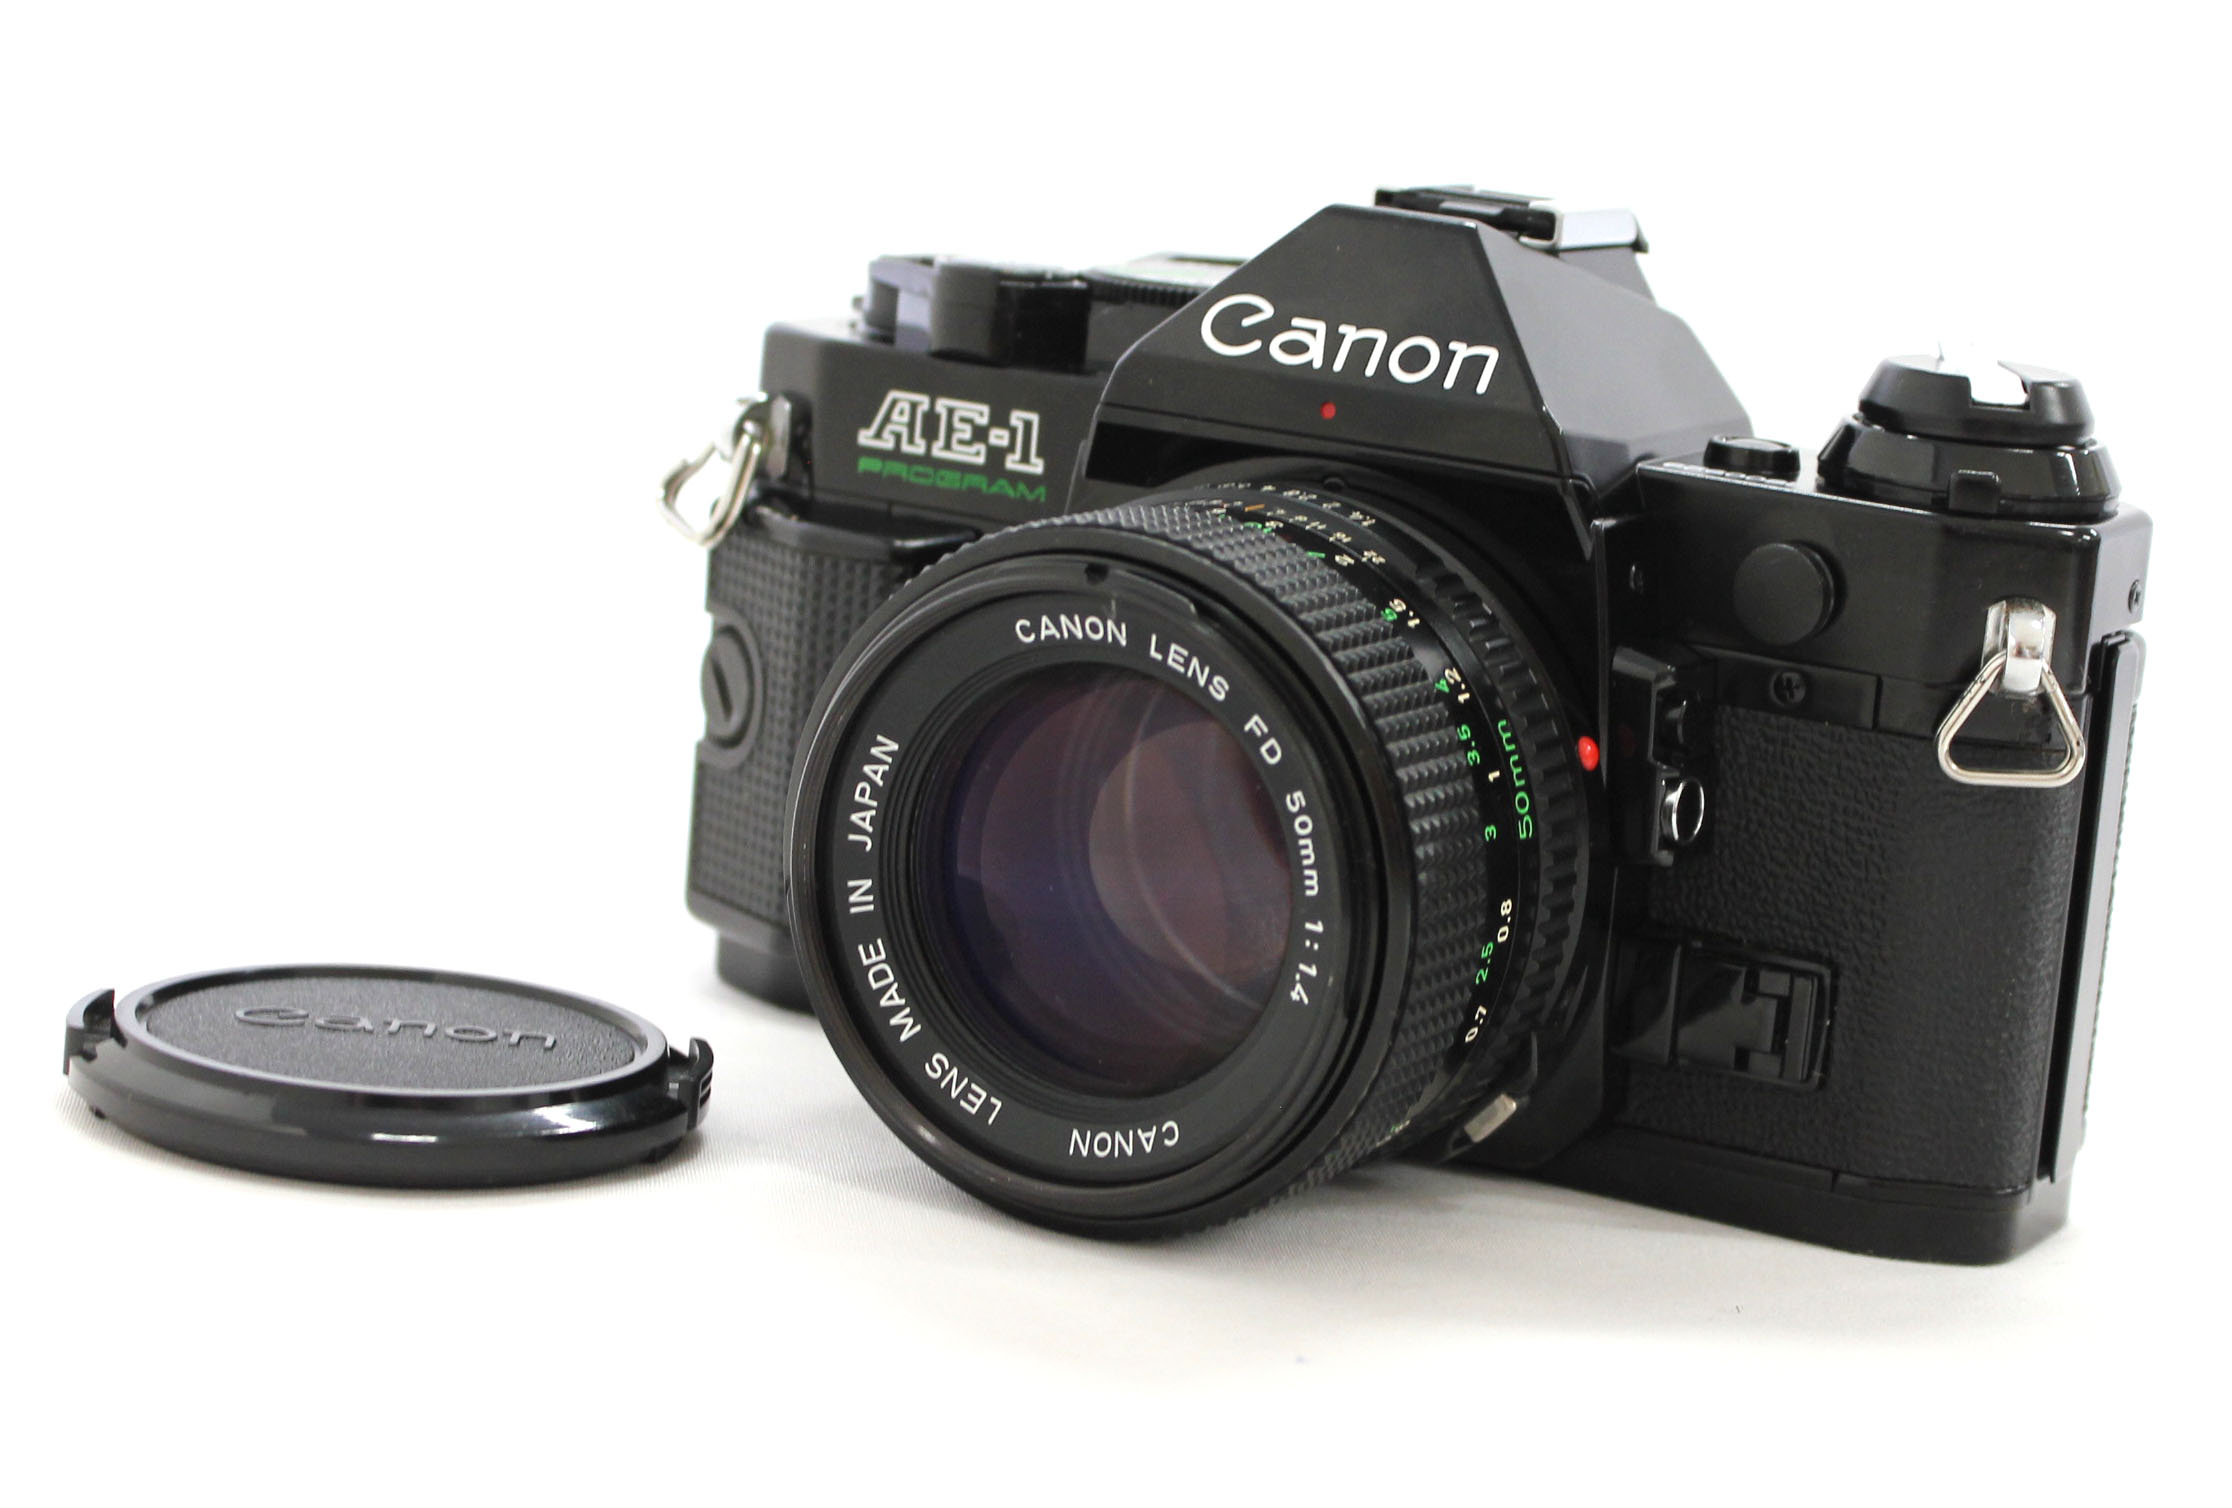 Japan Used Camera Shop | Canon AE-1 Program 35mm SLR Film Camera Black with New FD NFD 50mm F/1.4 Lens from Japan